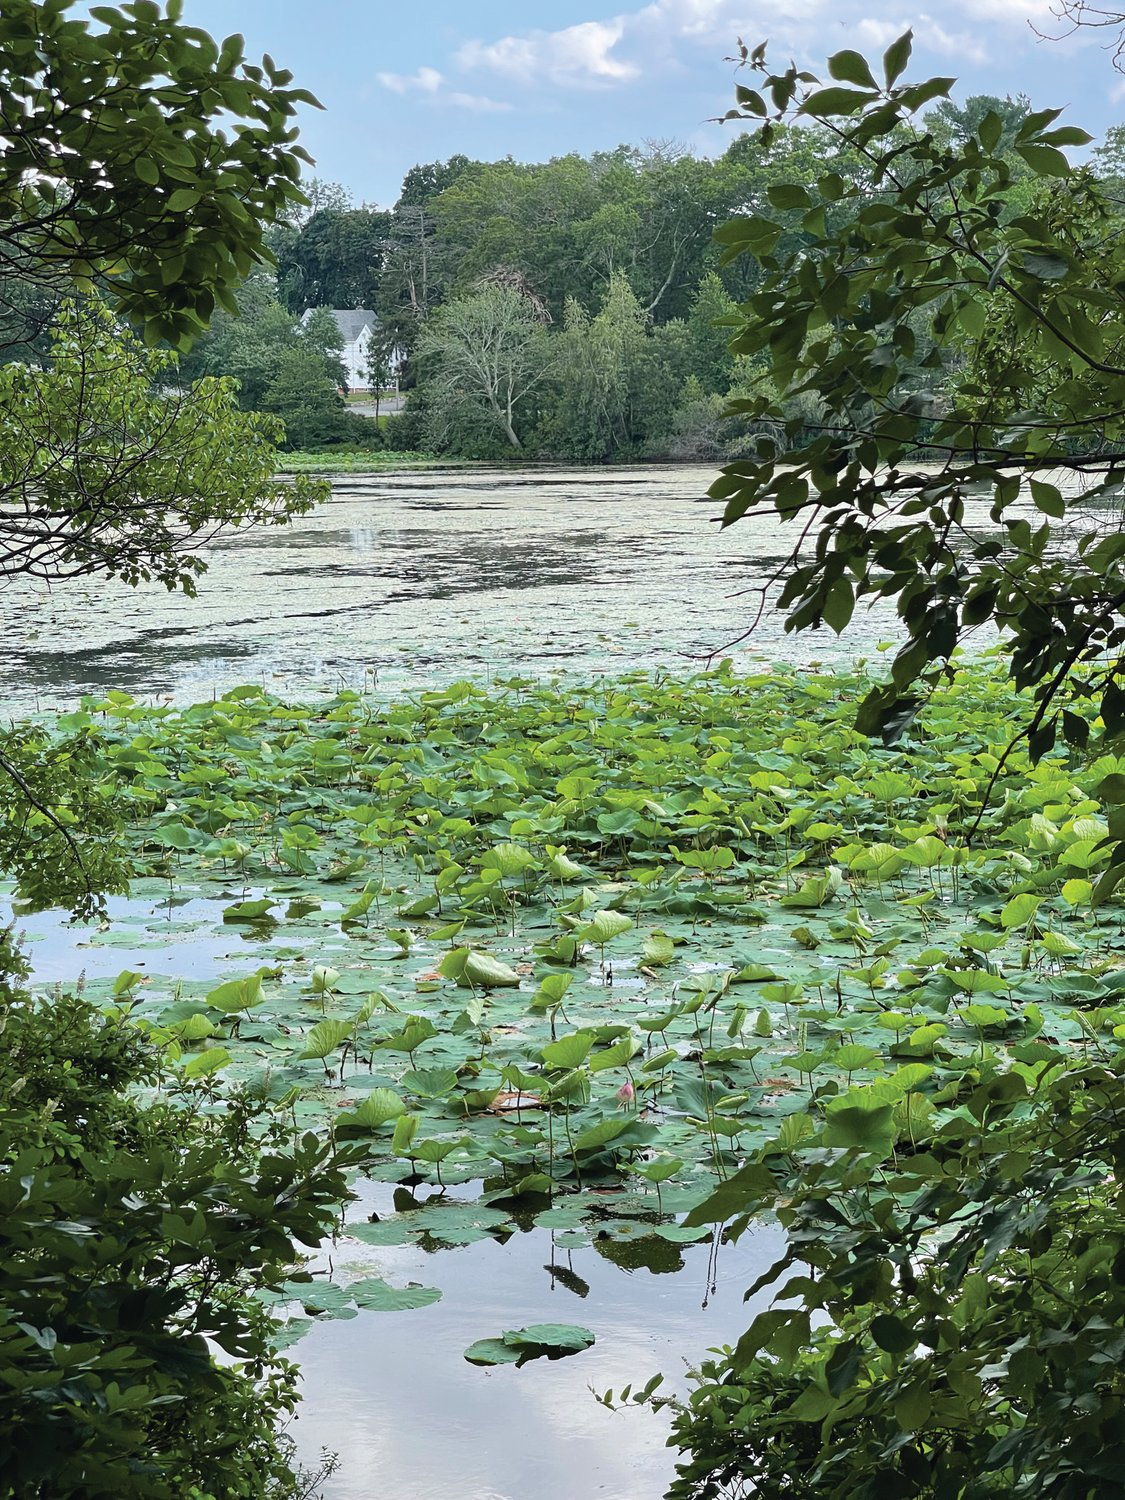 THE LOTUS: A portion of the sacred lotus bloom at Meshanticut Lake is seen from a portion of the loop during a walk earlier this summer.